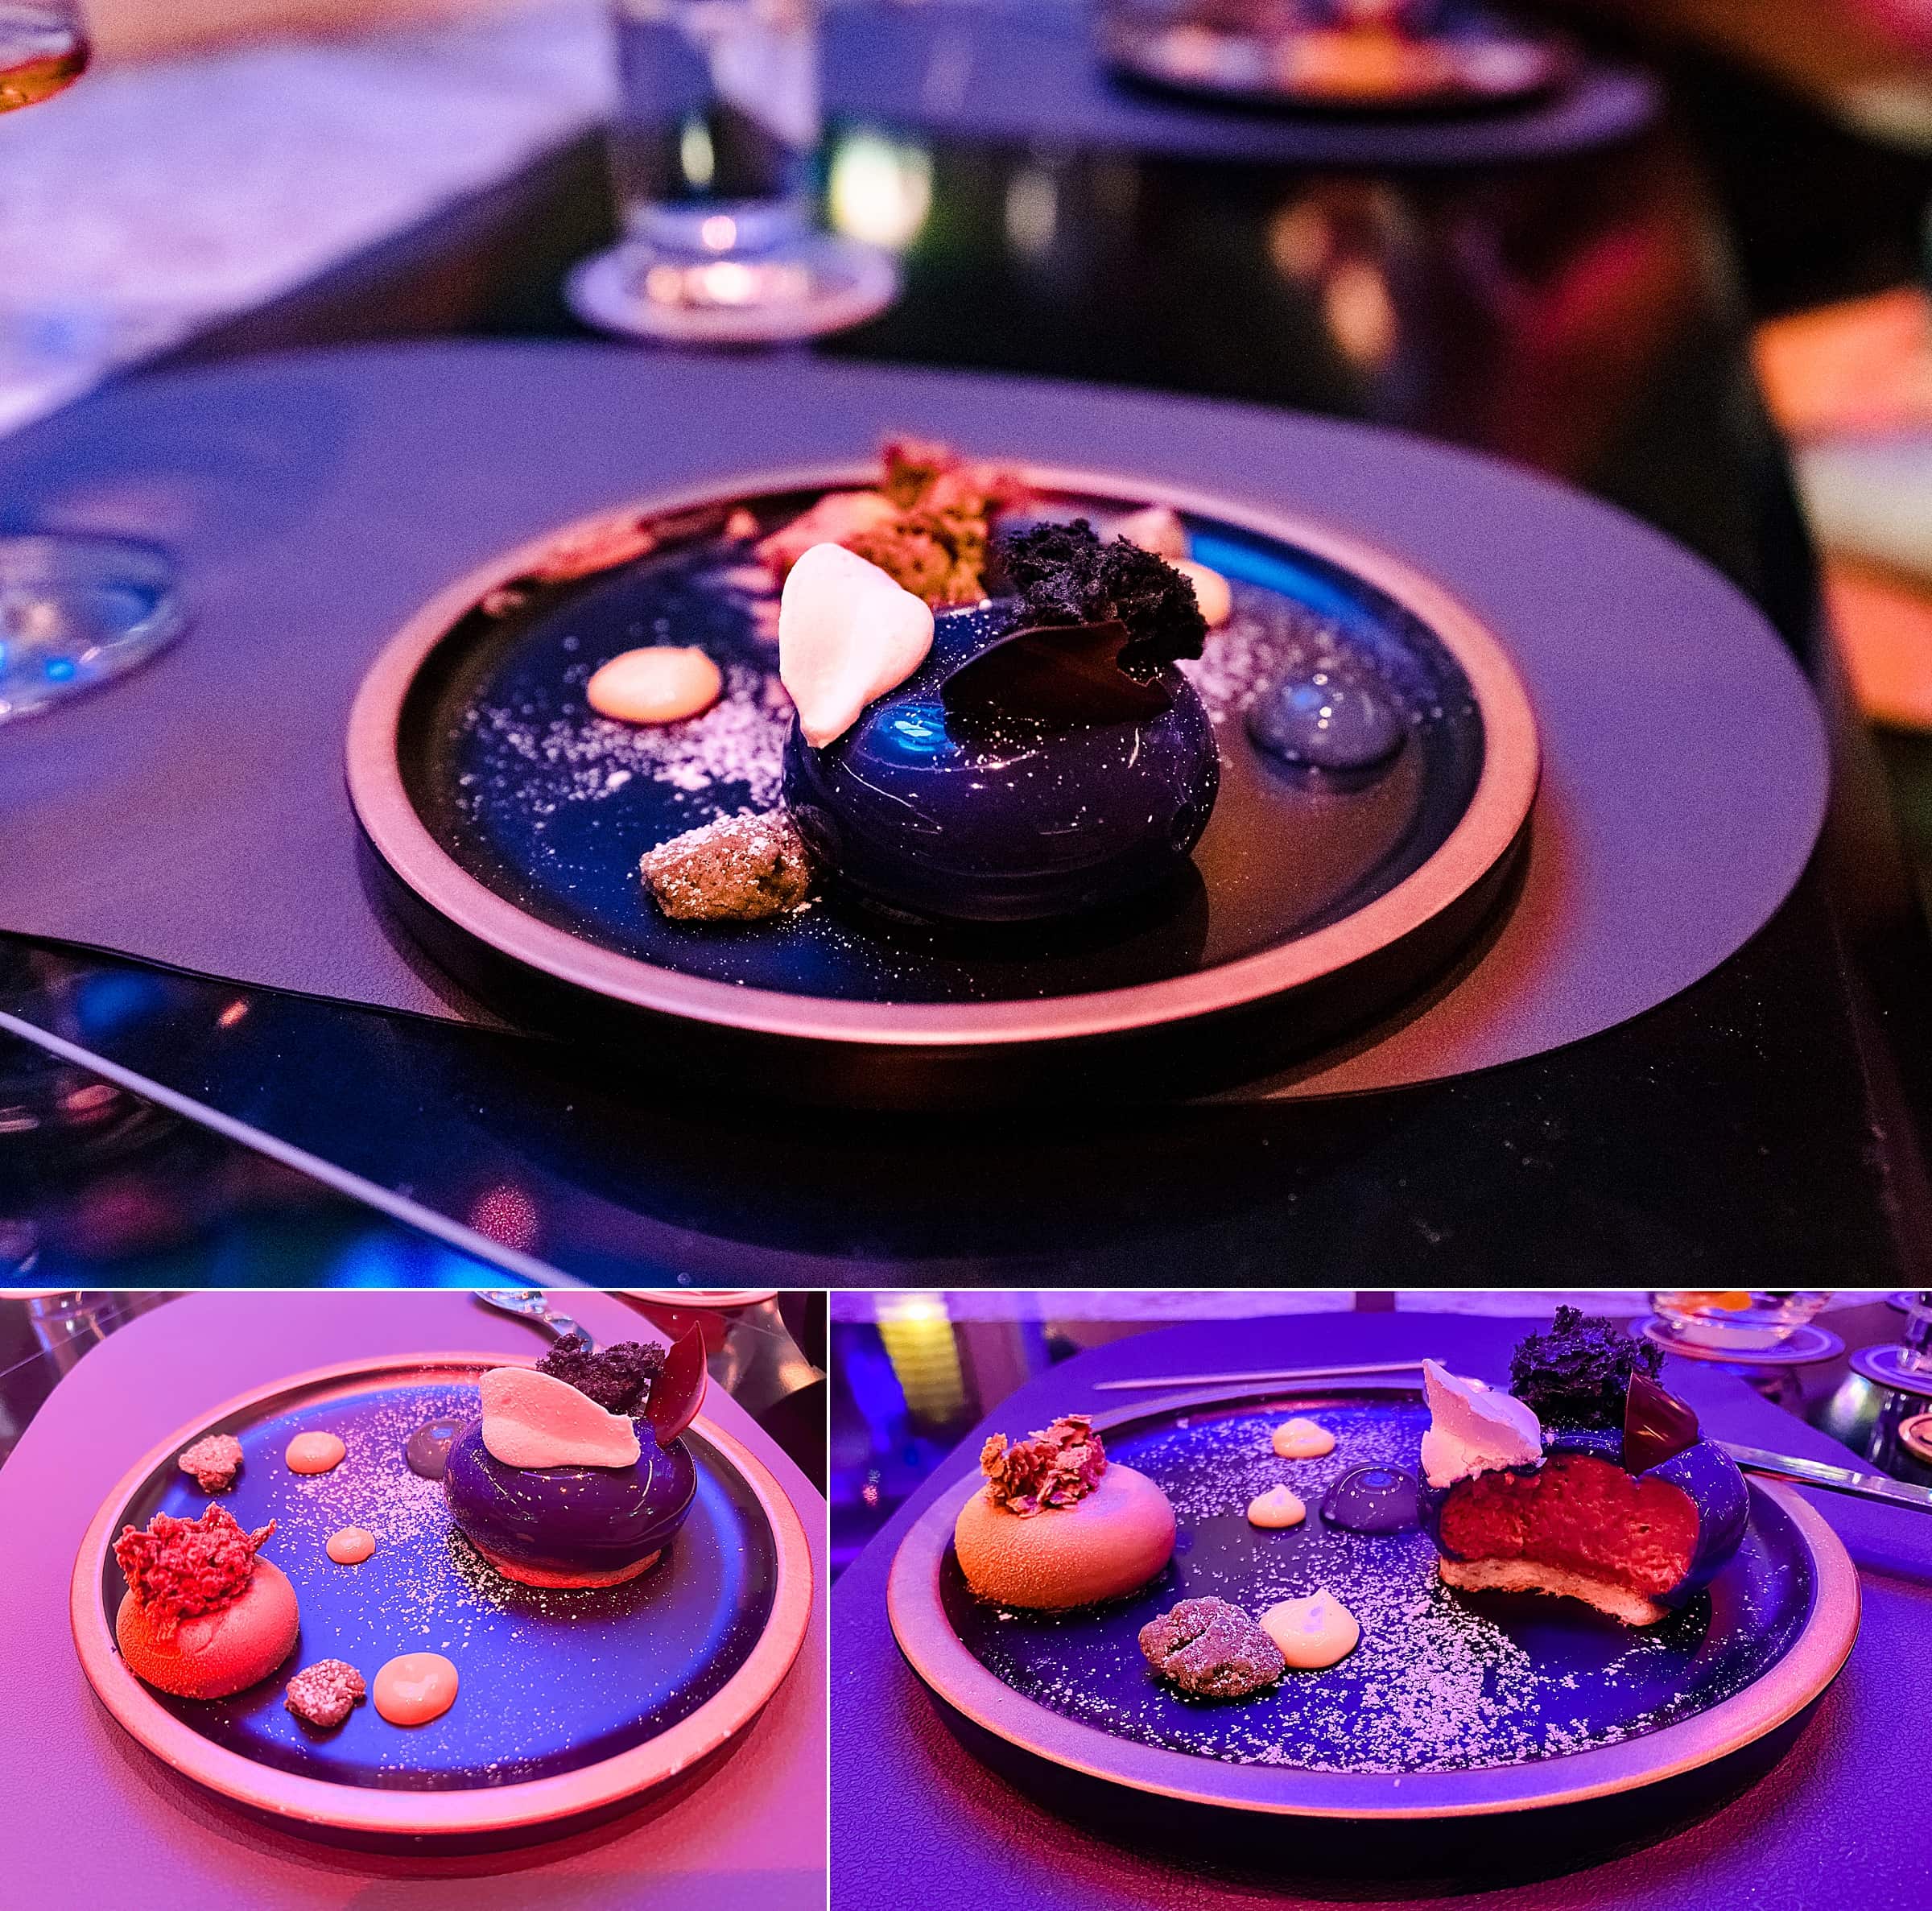 dessert at the captain's table on the Star Wars Galactic Starcruiser at Disney World